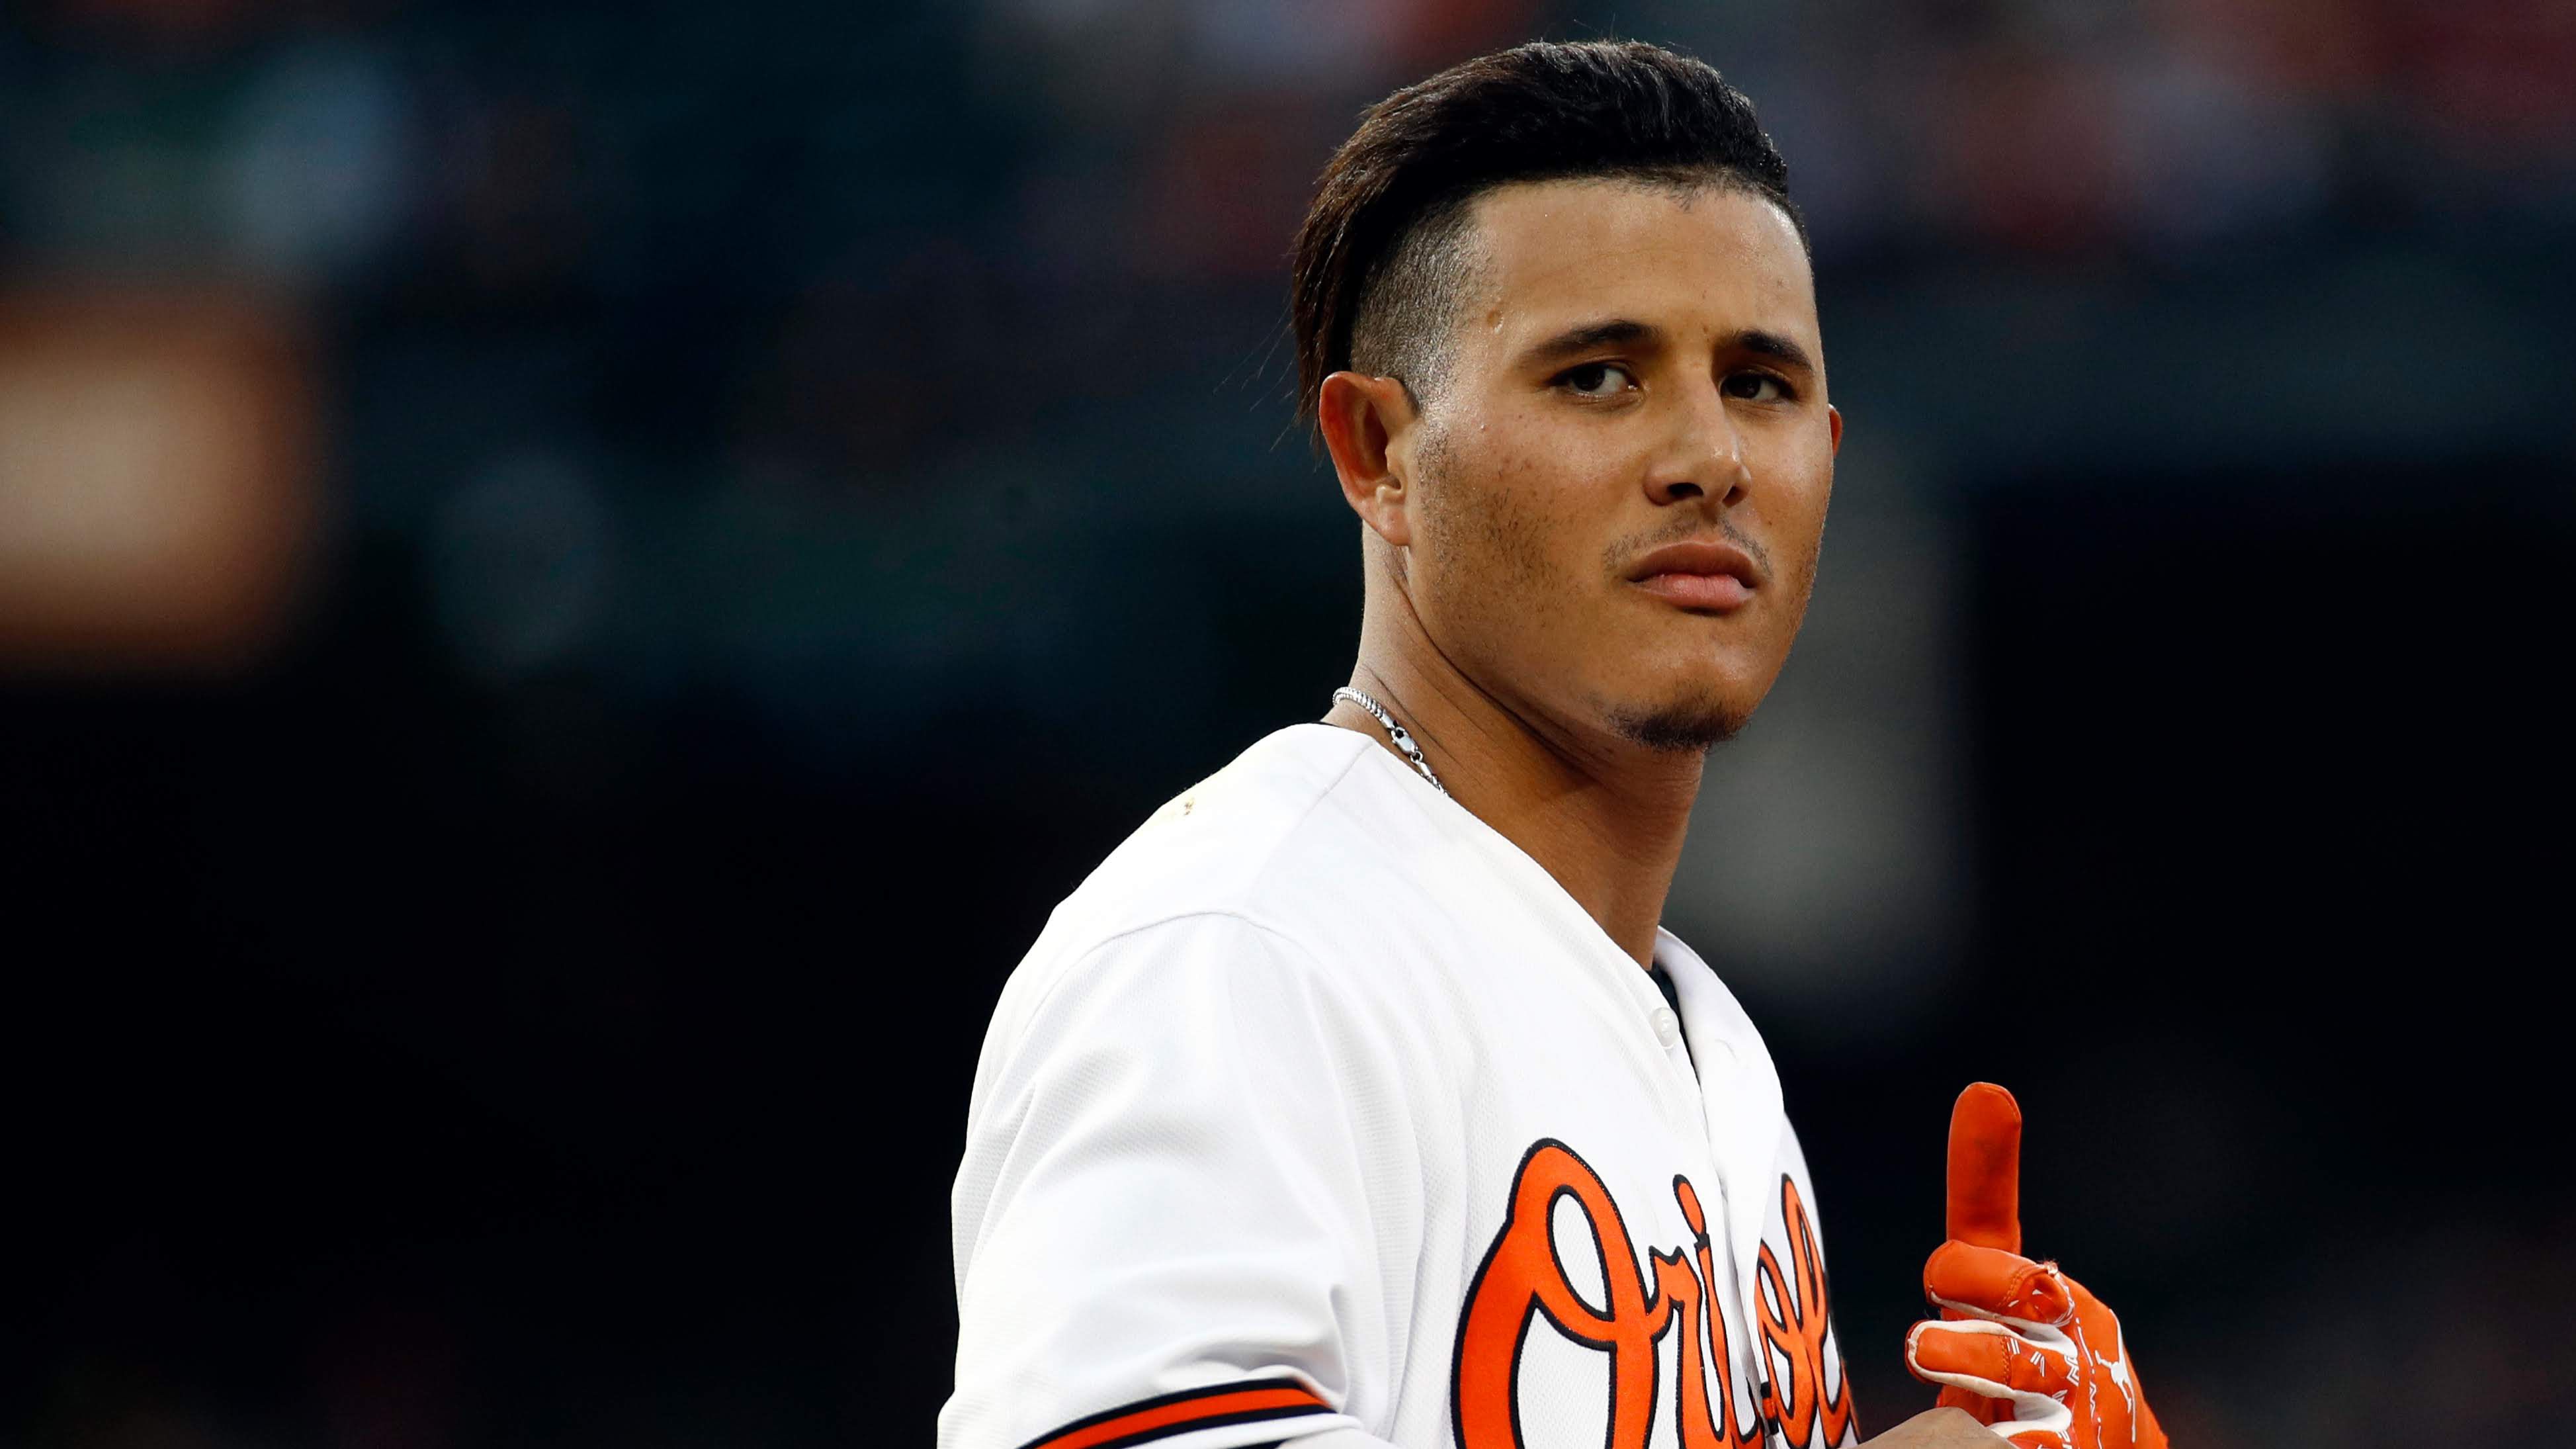 Let's assess the Padres' decision to sign Manny Machado to a 10